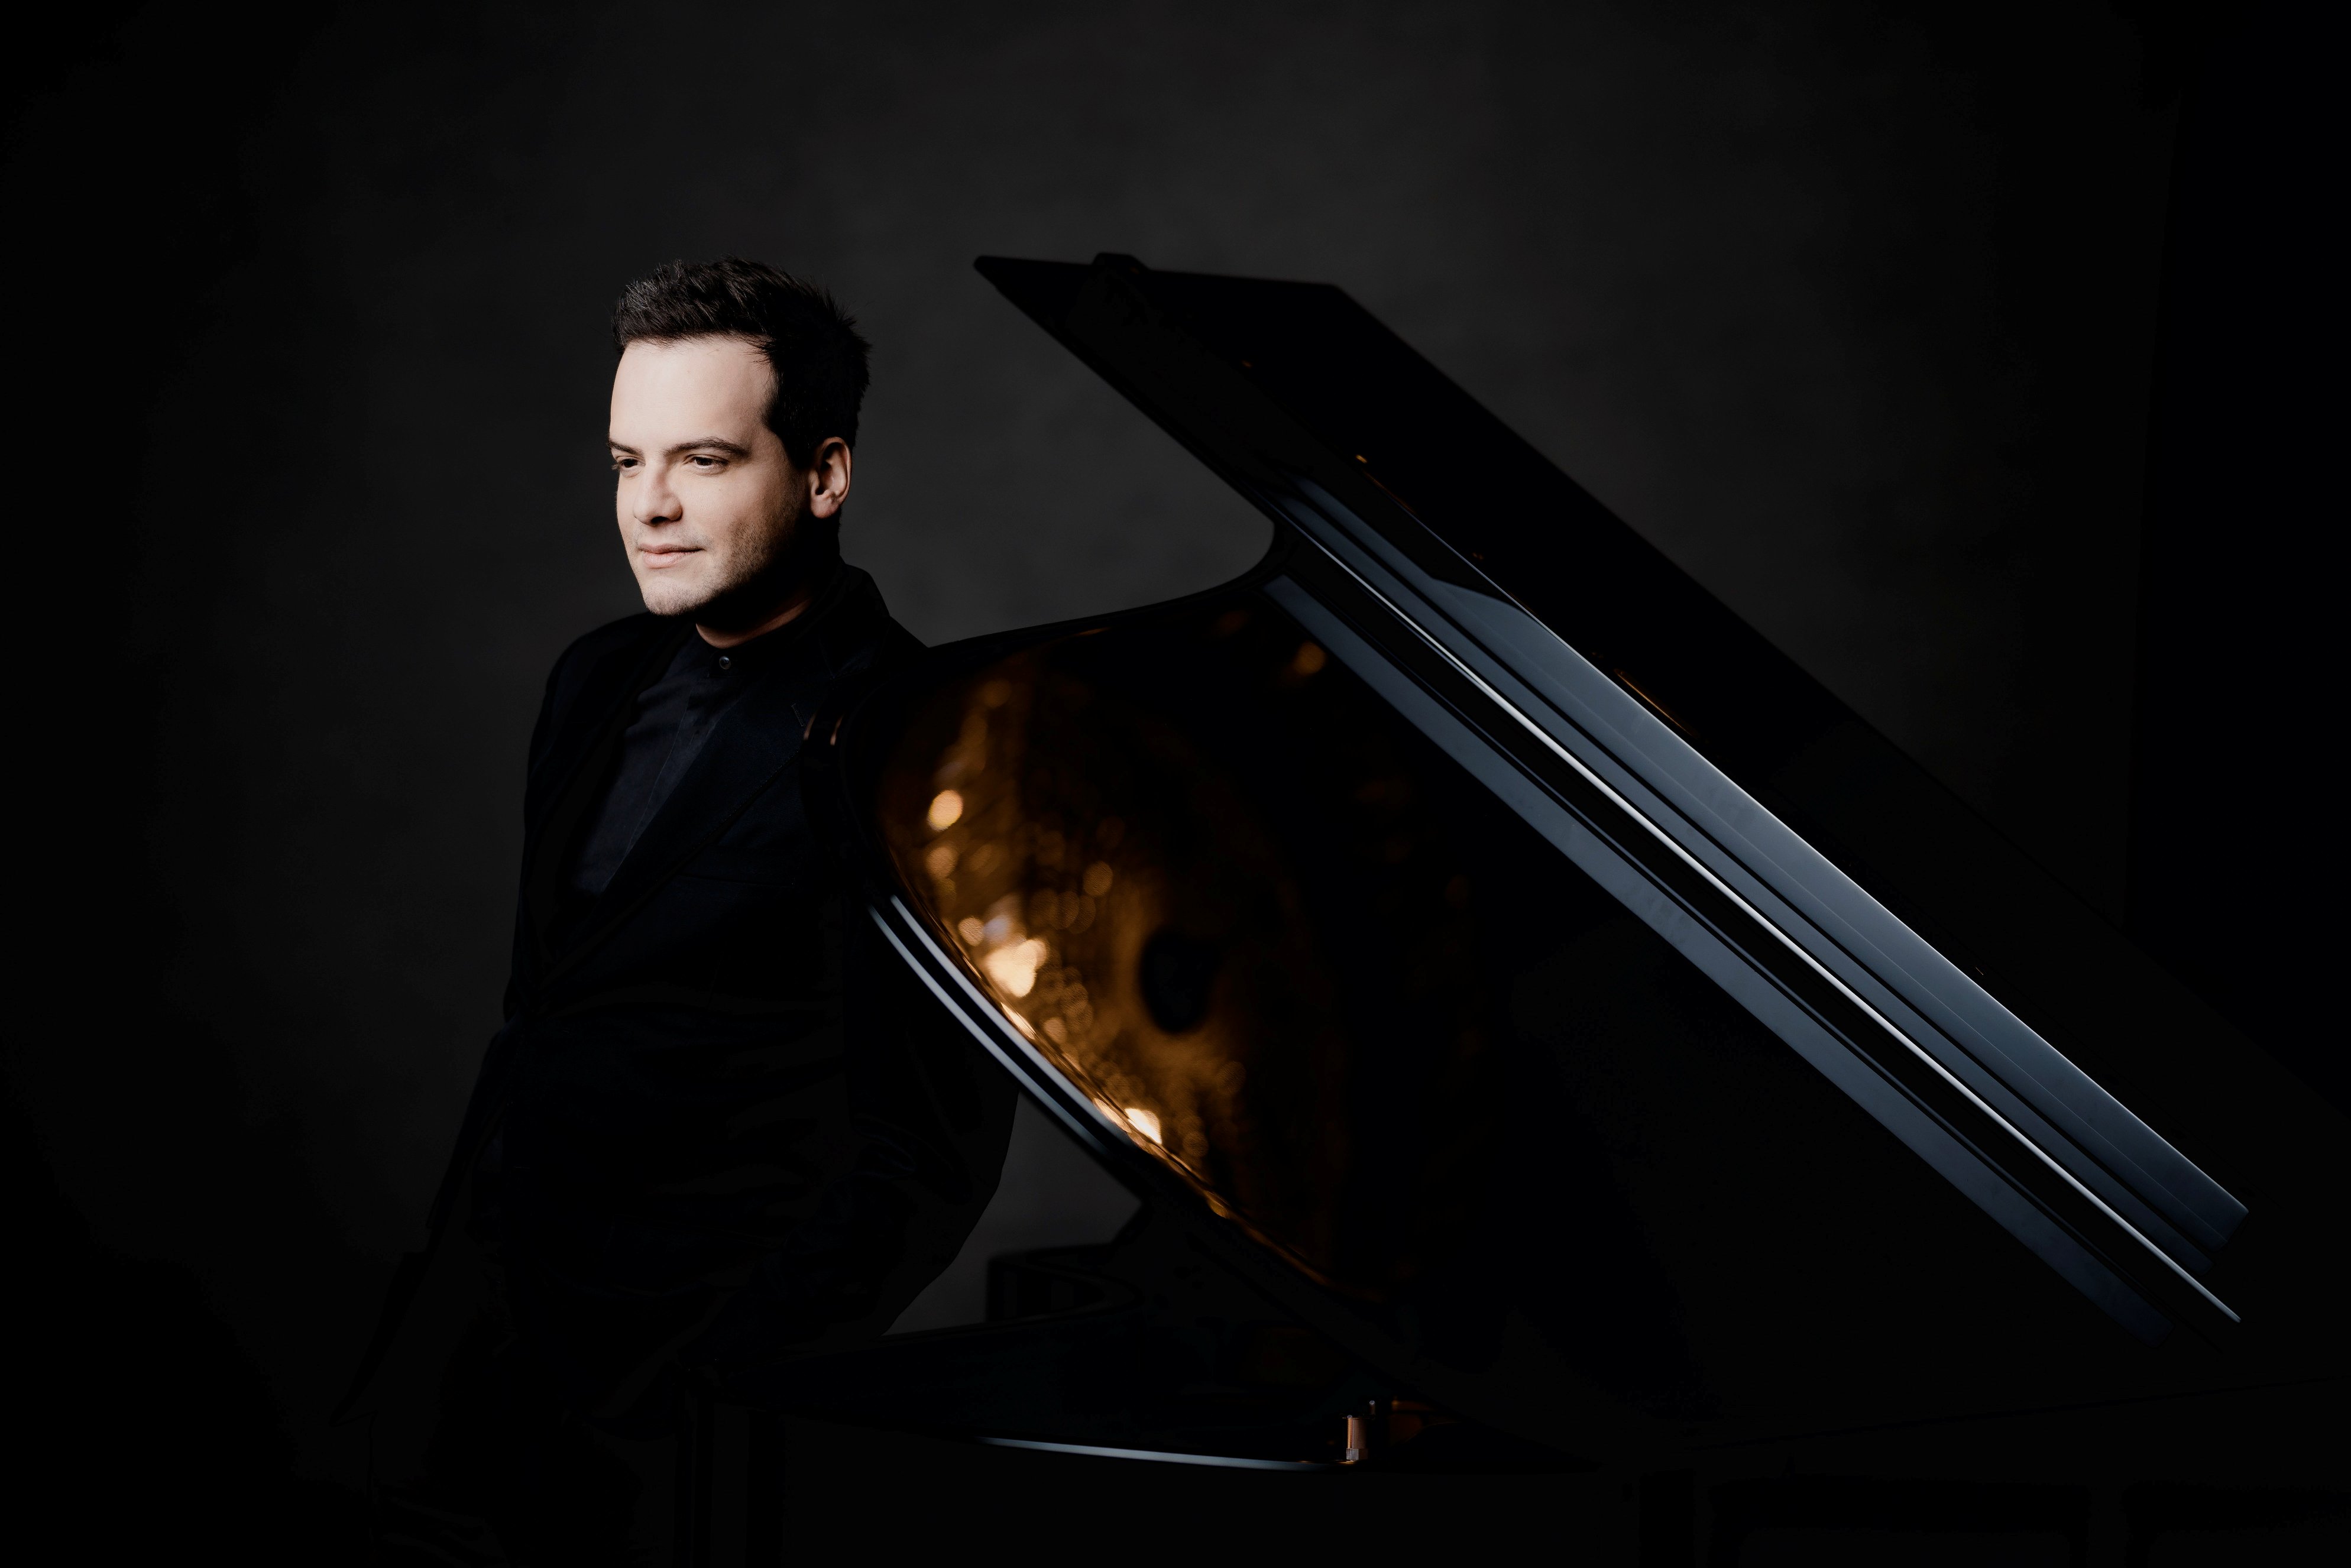 Photo: The 63rd Jaén Piano Prize will start off tomorrow with a concert by the prestigious pianist Francesco Piemontesi